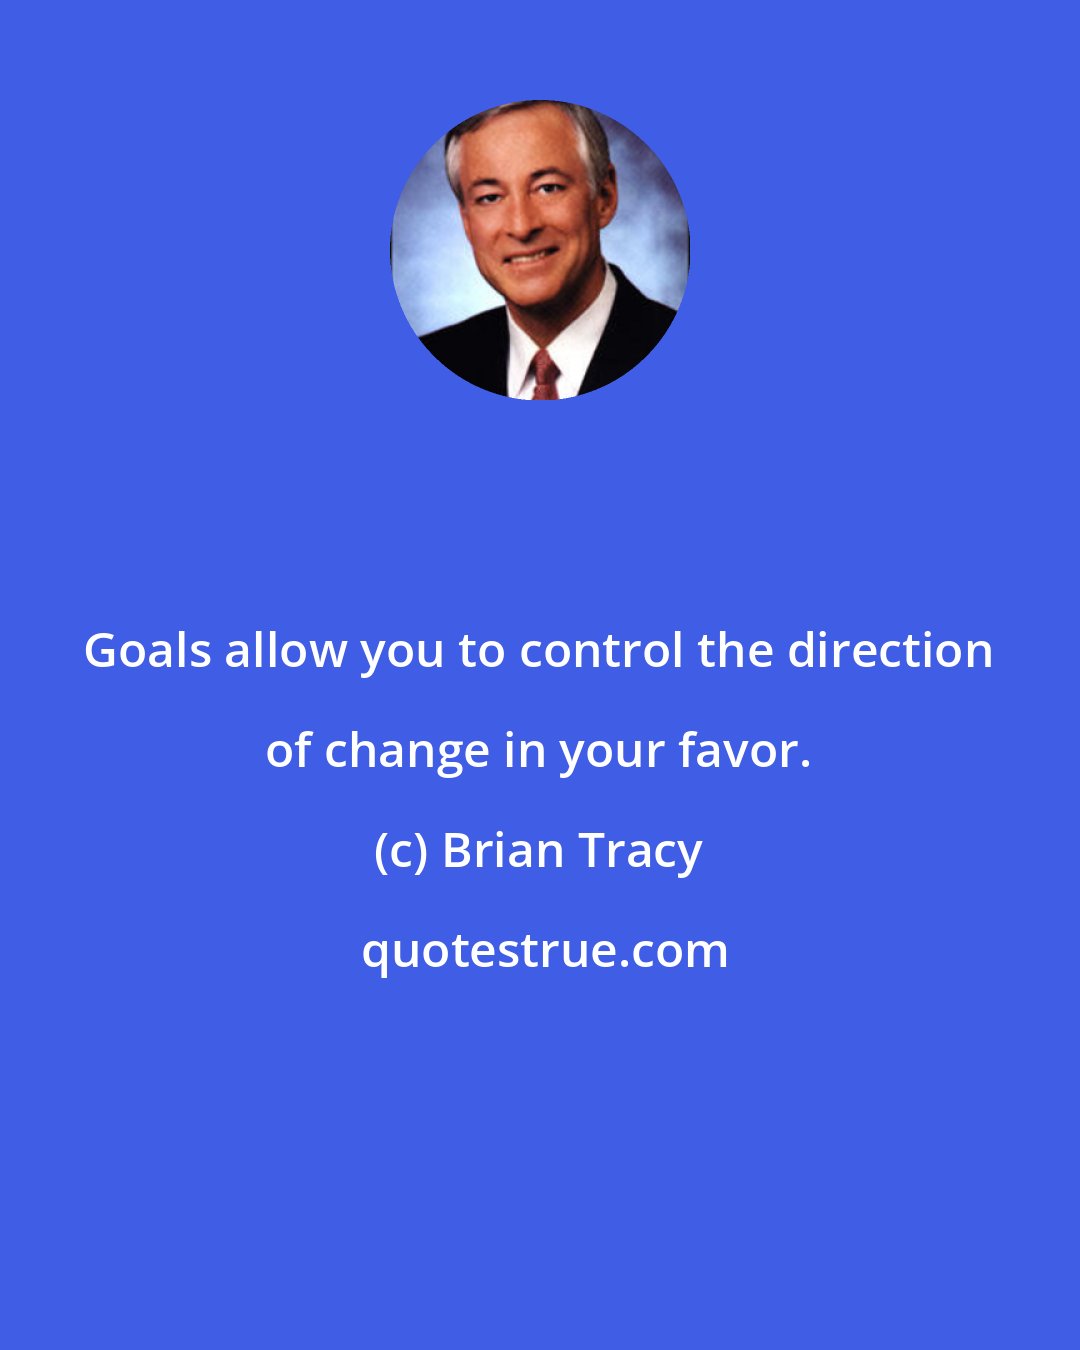 Brian Tracy: Goals allow you to control the direction of change in your favor.